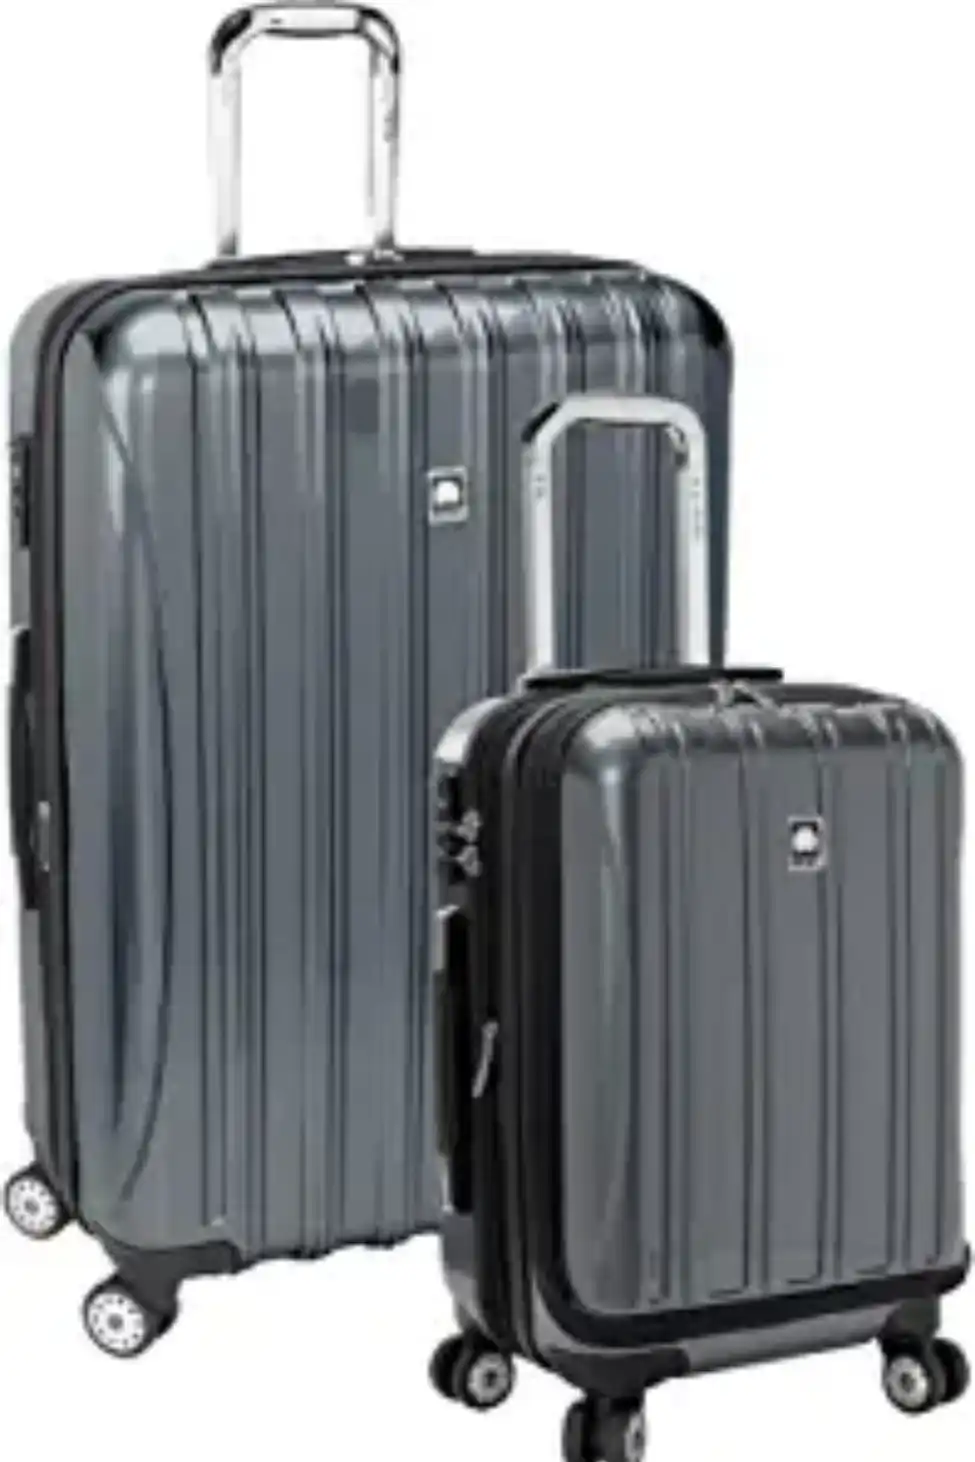  Roll over image to zoom in DELSEY Paris Helium Aero Hardside Expandable Luggage with Spinner Wheels, Titanium, 2-Piece Set (19/29)